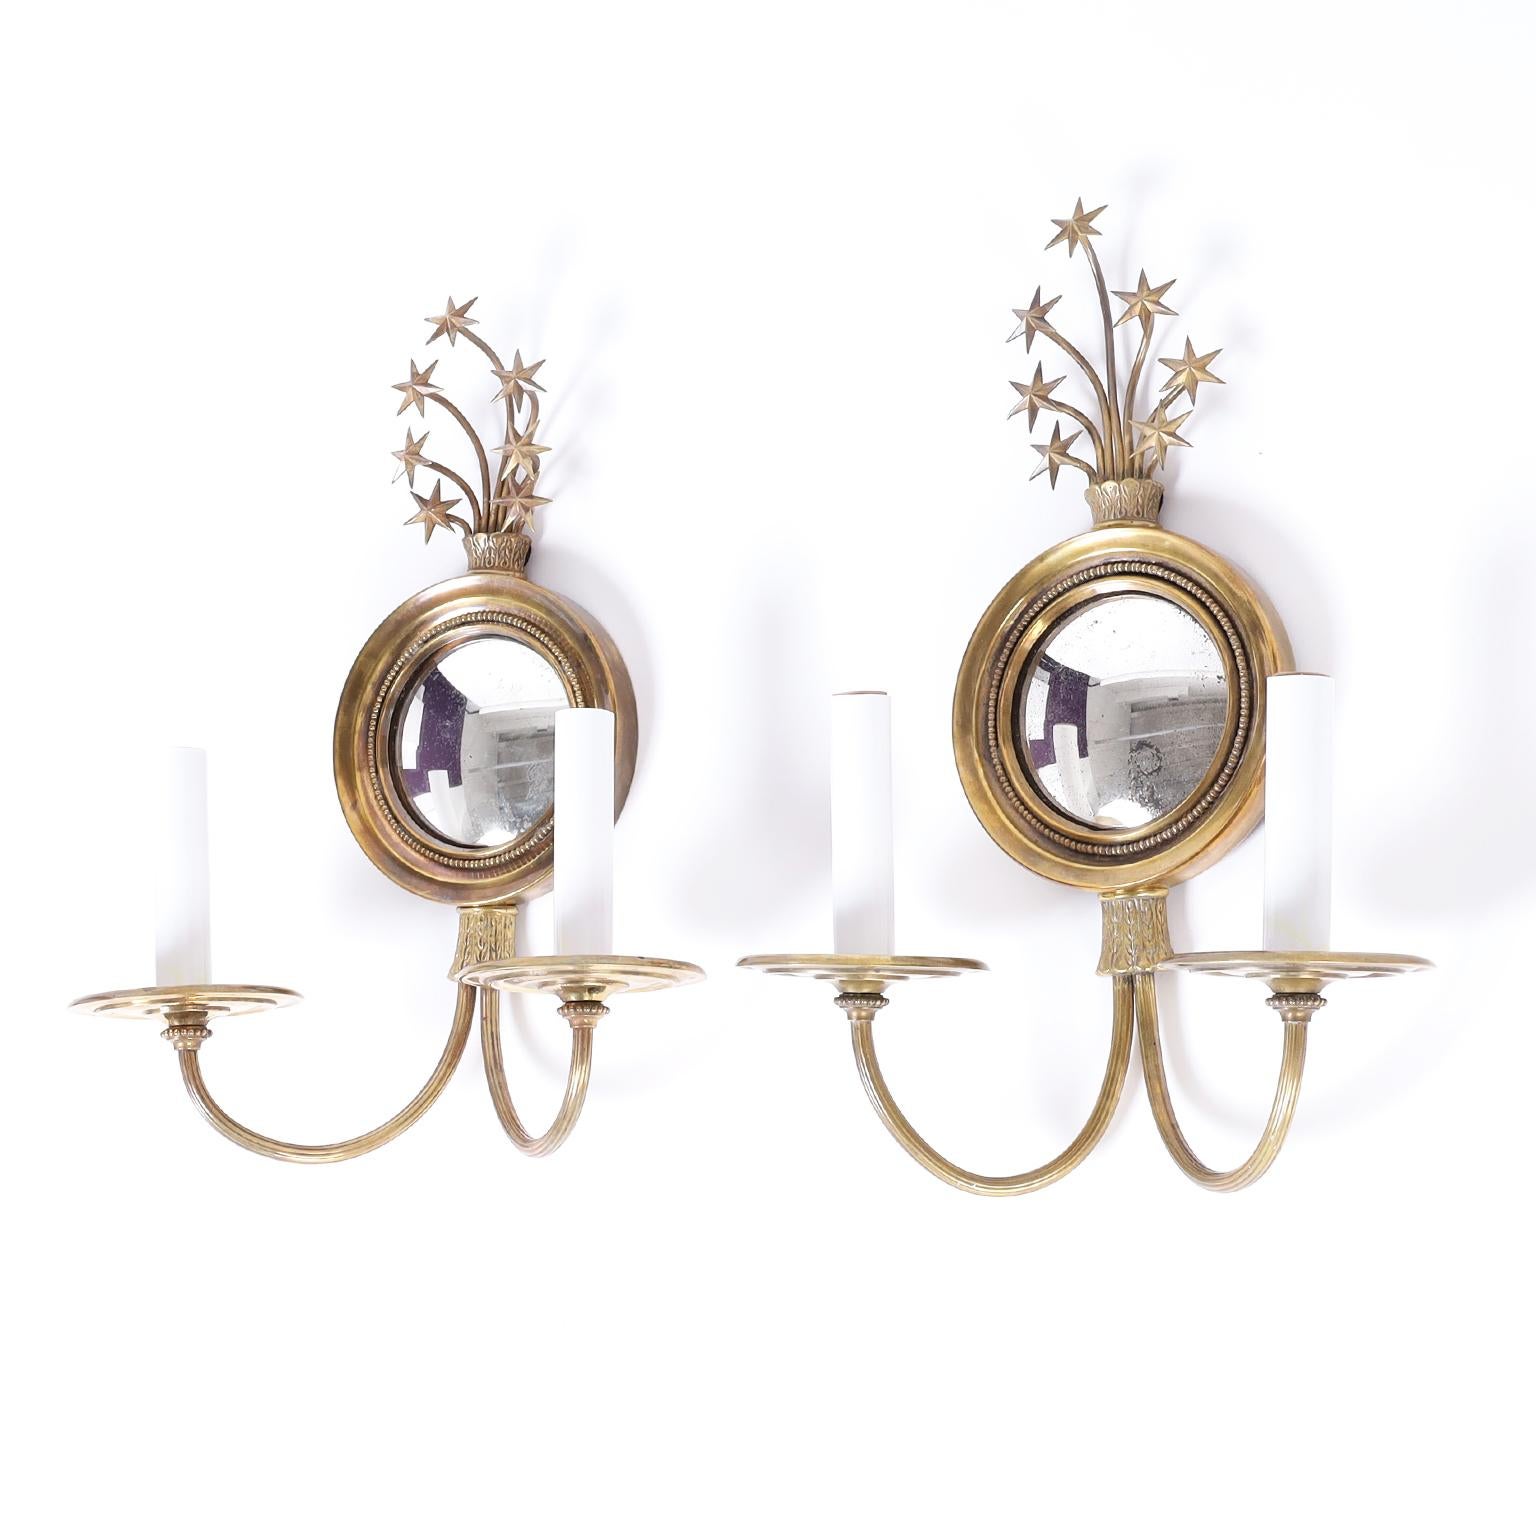 Federal Pair of Brass & Mirrored Wall Sconces with Stars